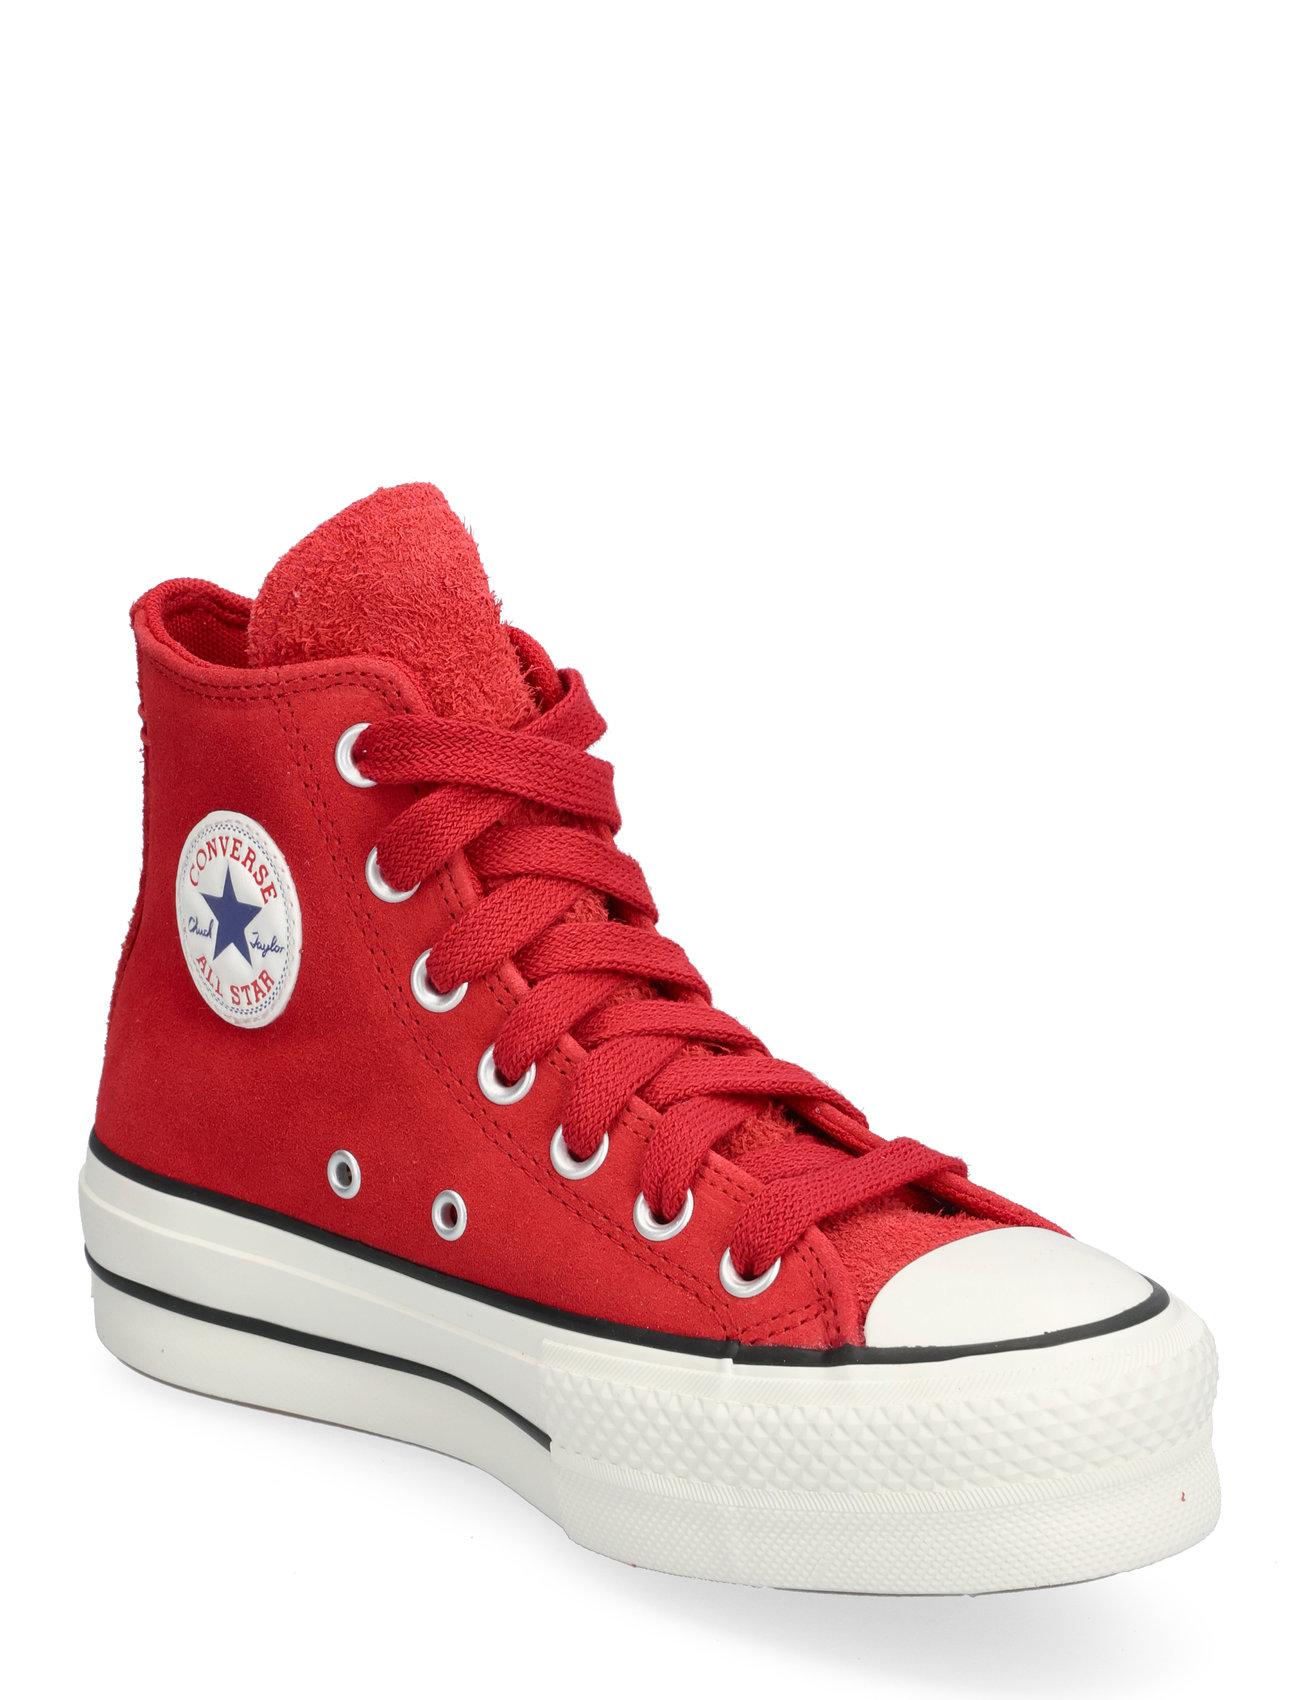 Converse "Chuck Taylor All Star Lift High-top Sneakers Red Converse"